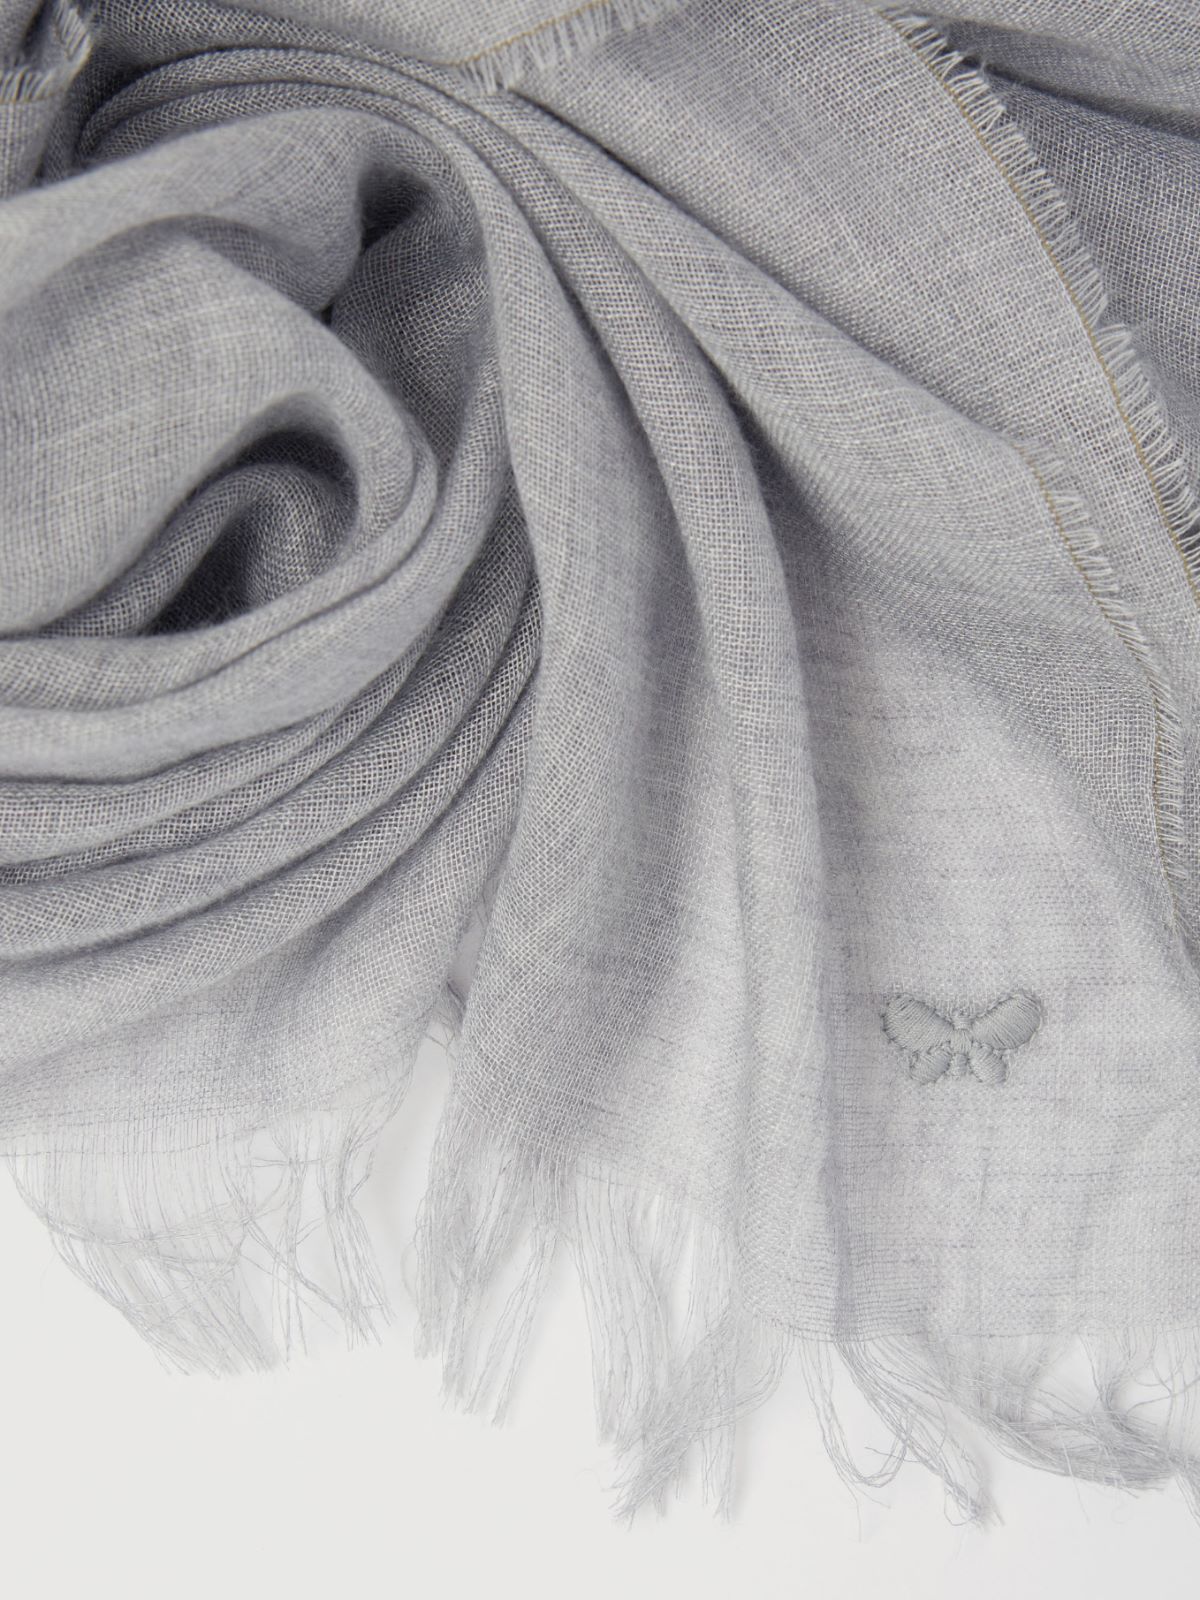 Viscose and cashmere stole - LIGHT GREY - Weekend Max Mara - 2